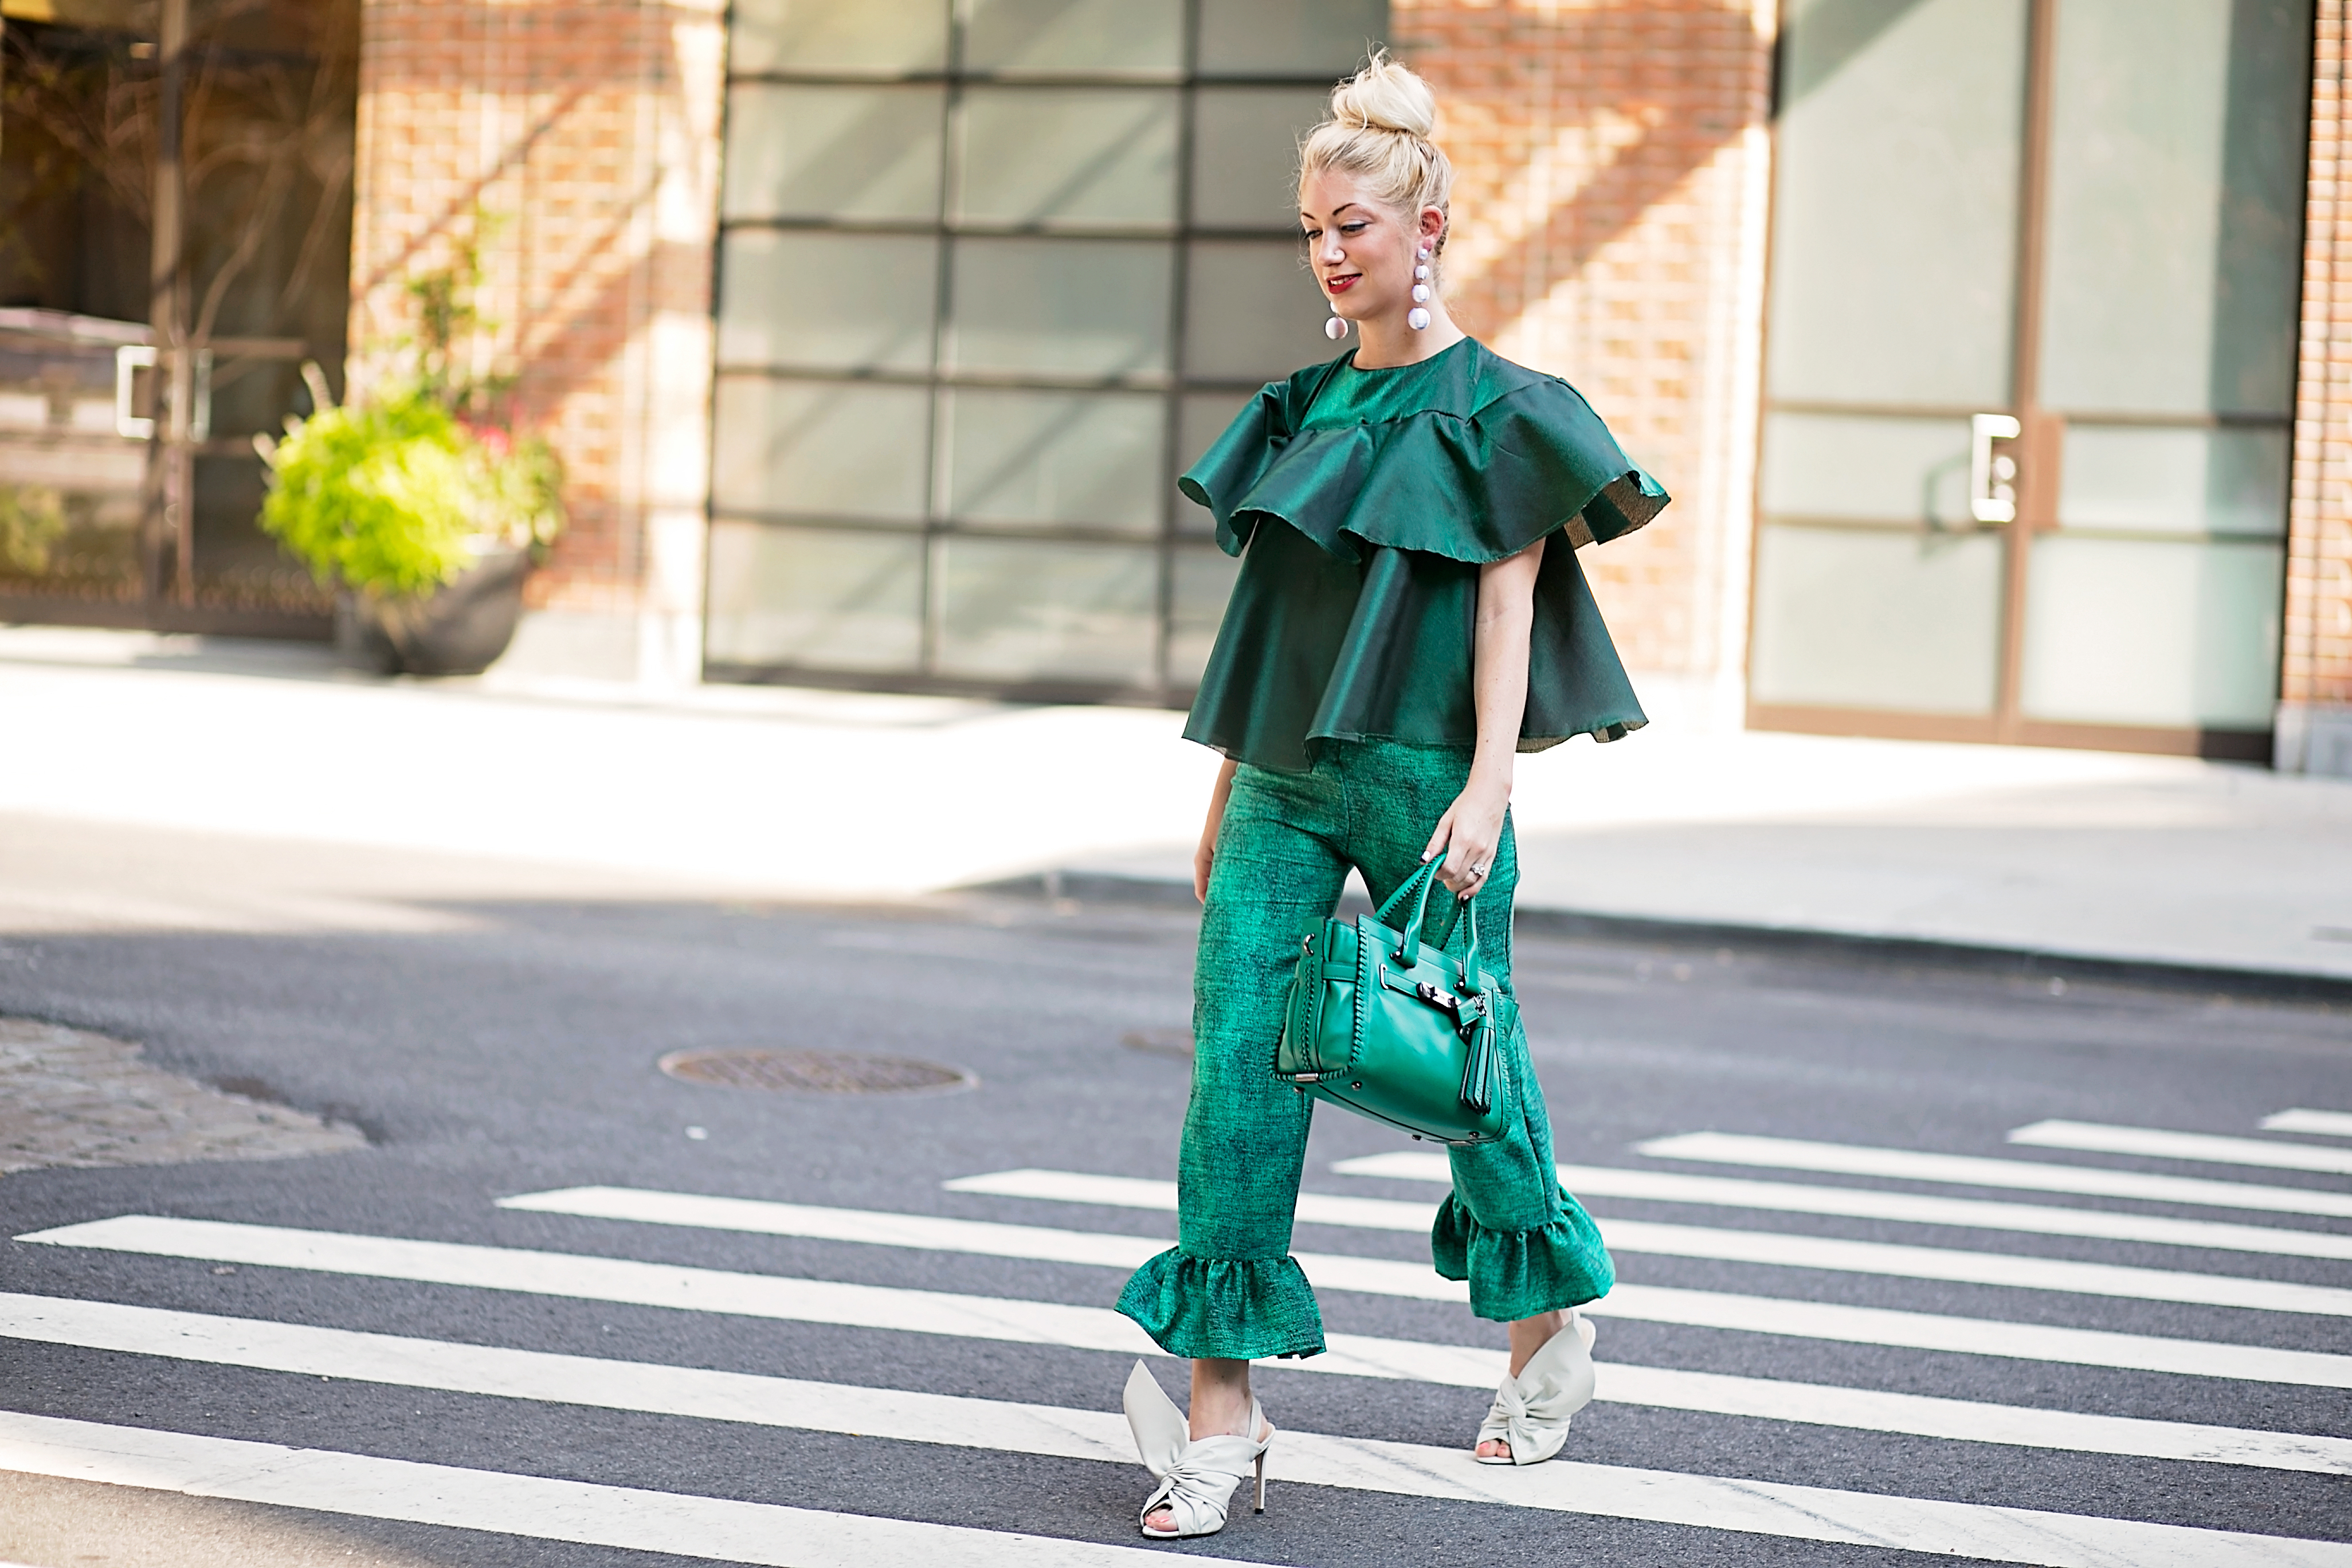 Green iridescent ruffle top and silk ruffle pants, made by Stefanie of The Style Safari, green Coach swagger bag